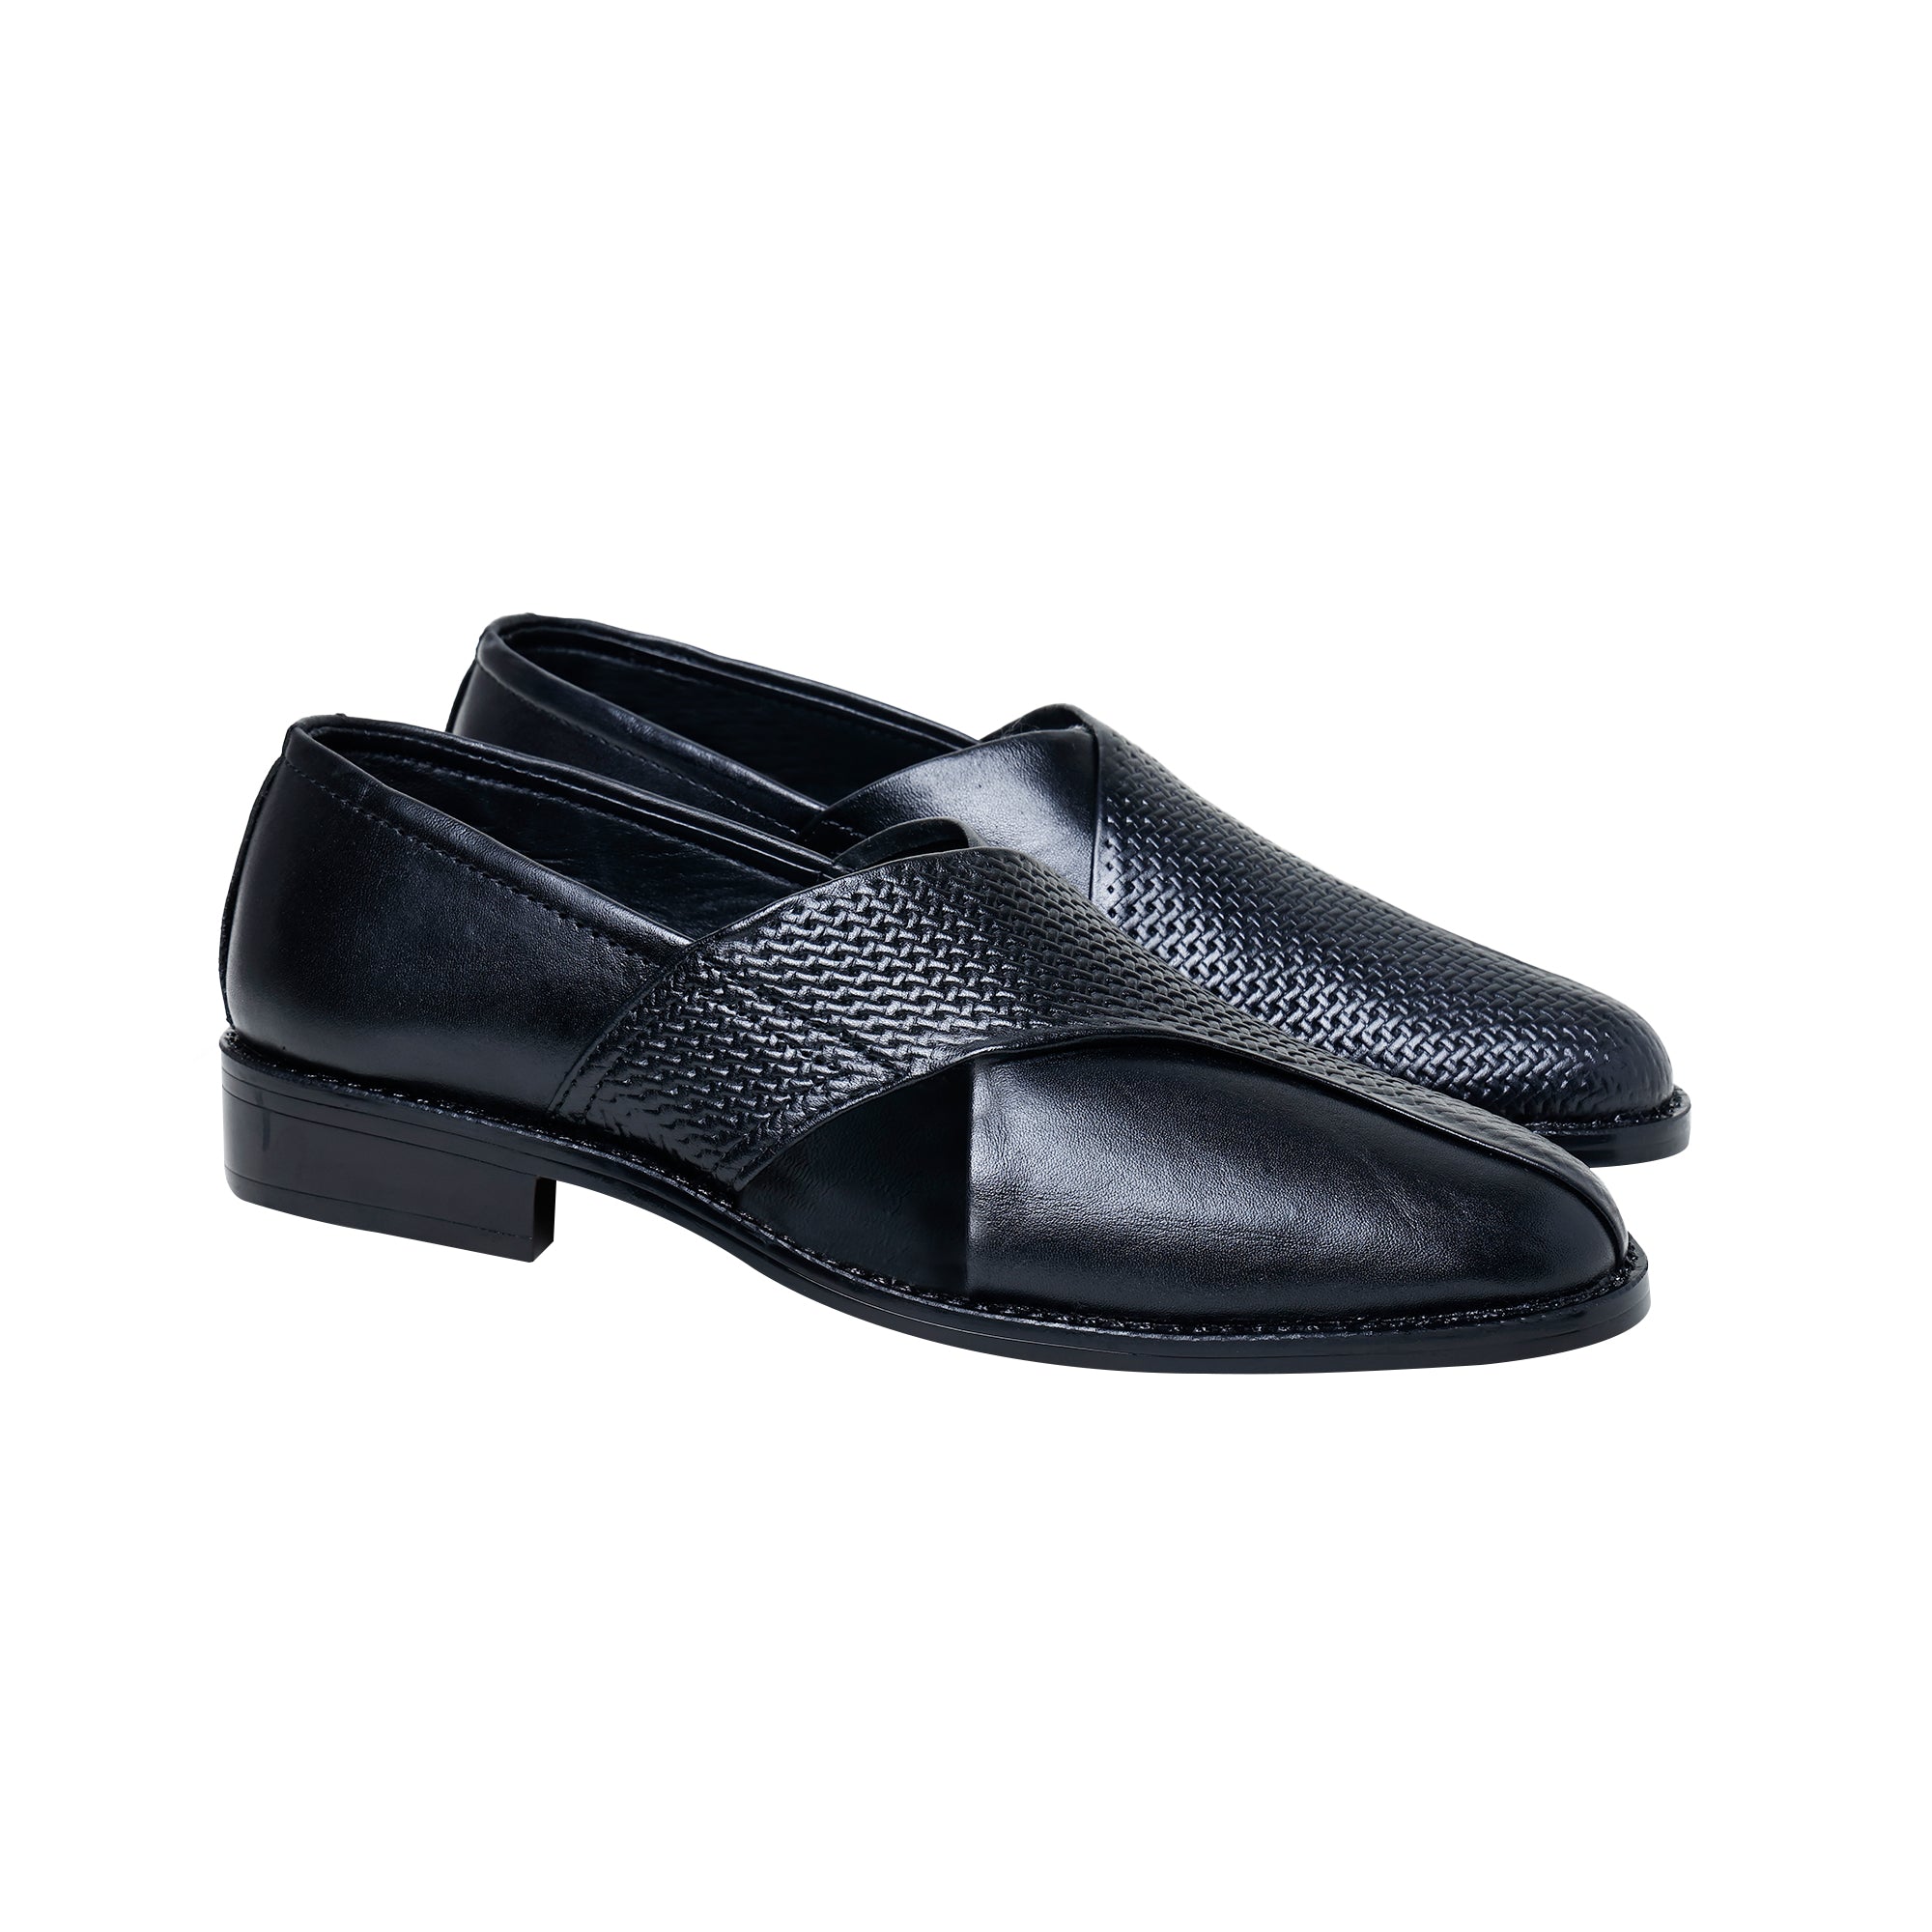 Louis Blanc Men’s Ethnic Leather Peshawari Slip On Shoes For Wedding| Party | Lightweight | PU Sole (LB17A)